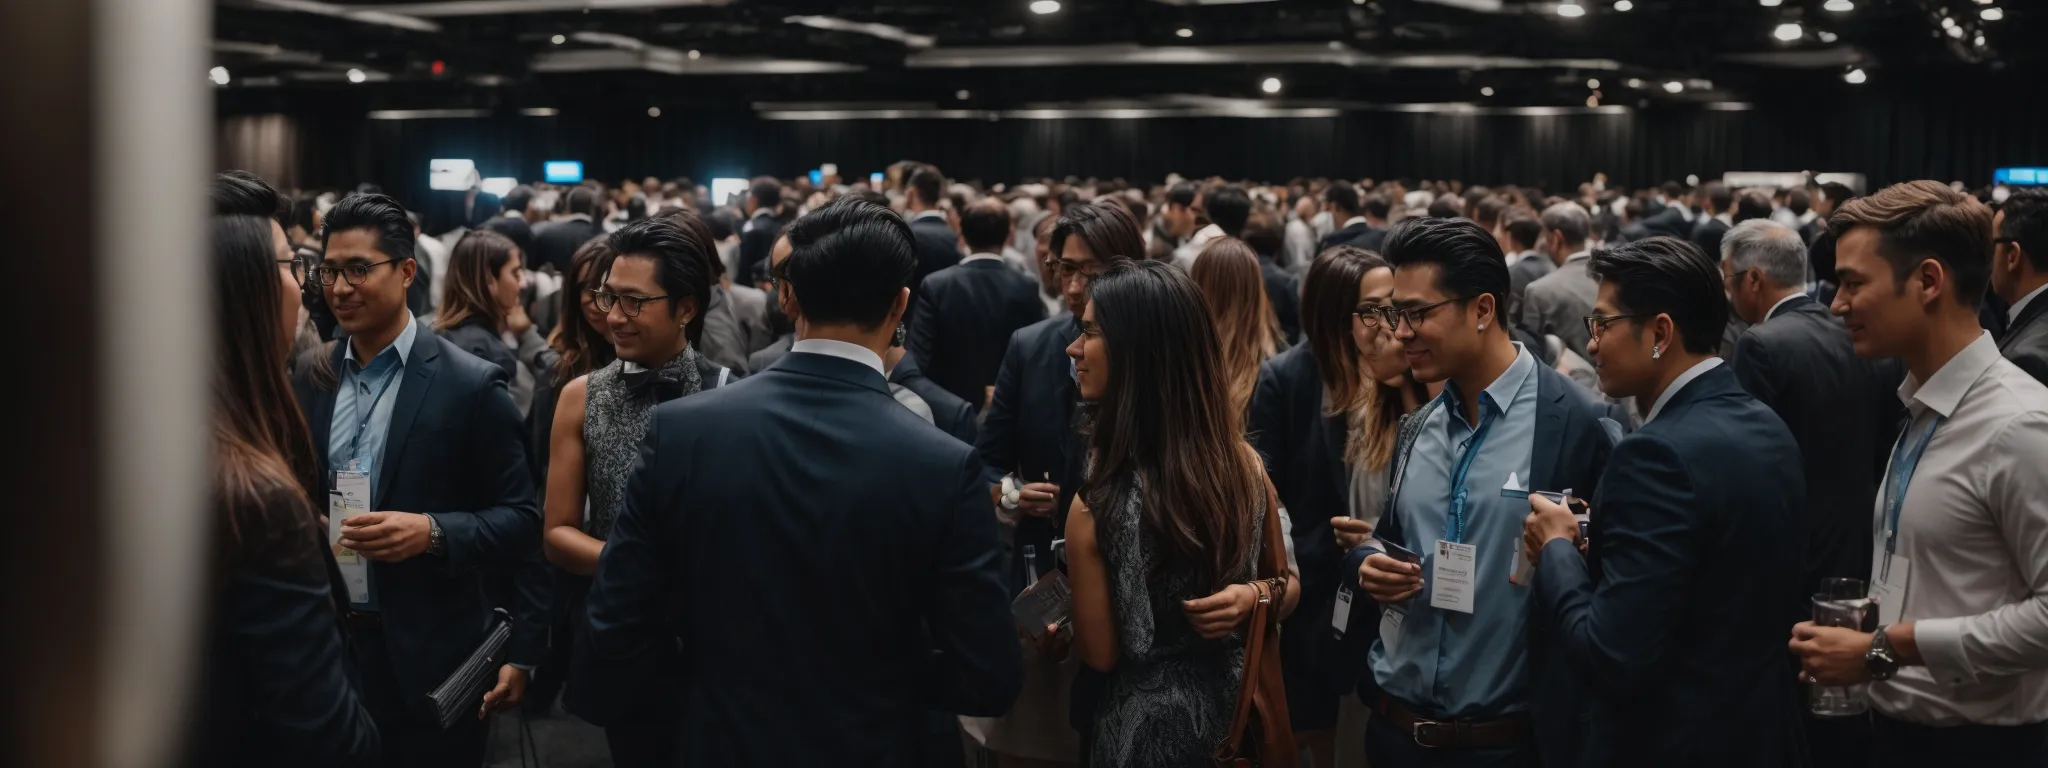 professionals mingle at a bustling tech conference, exchanging ideas and business cards.